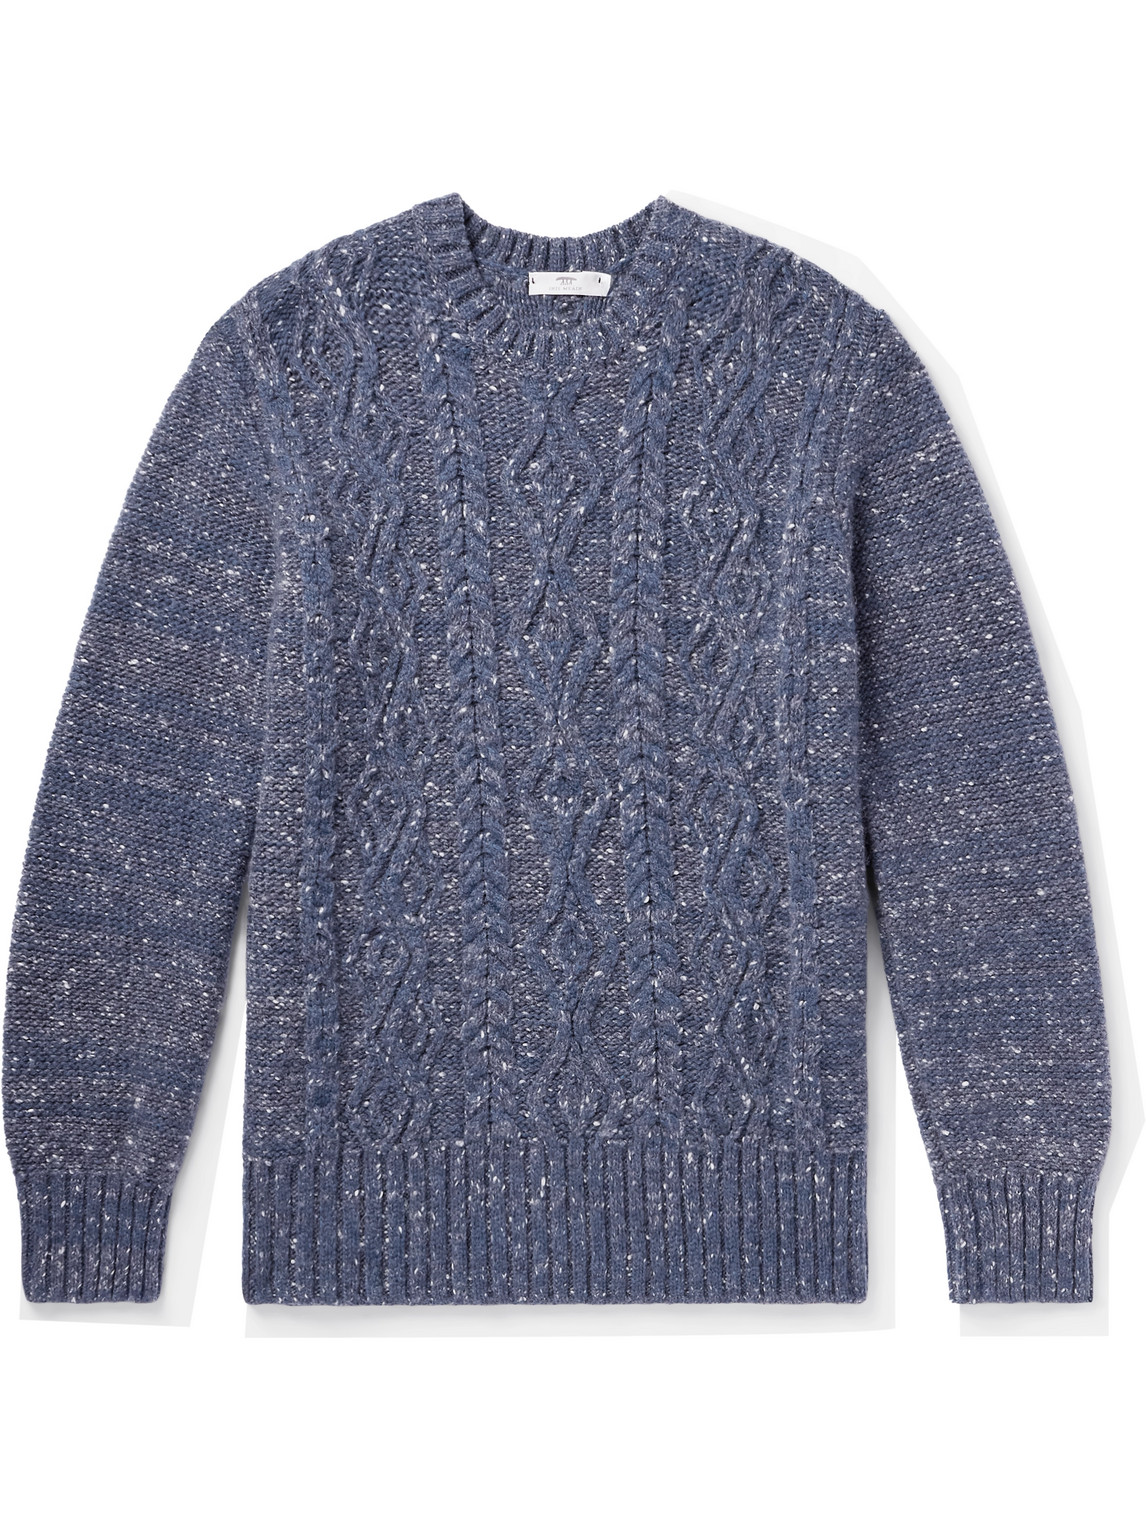 Inis Meáin Aran Cable-Knit Cashmere Sweater